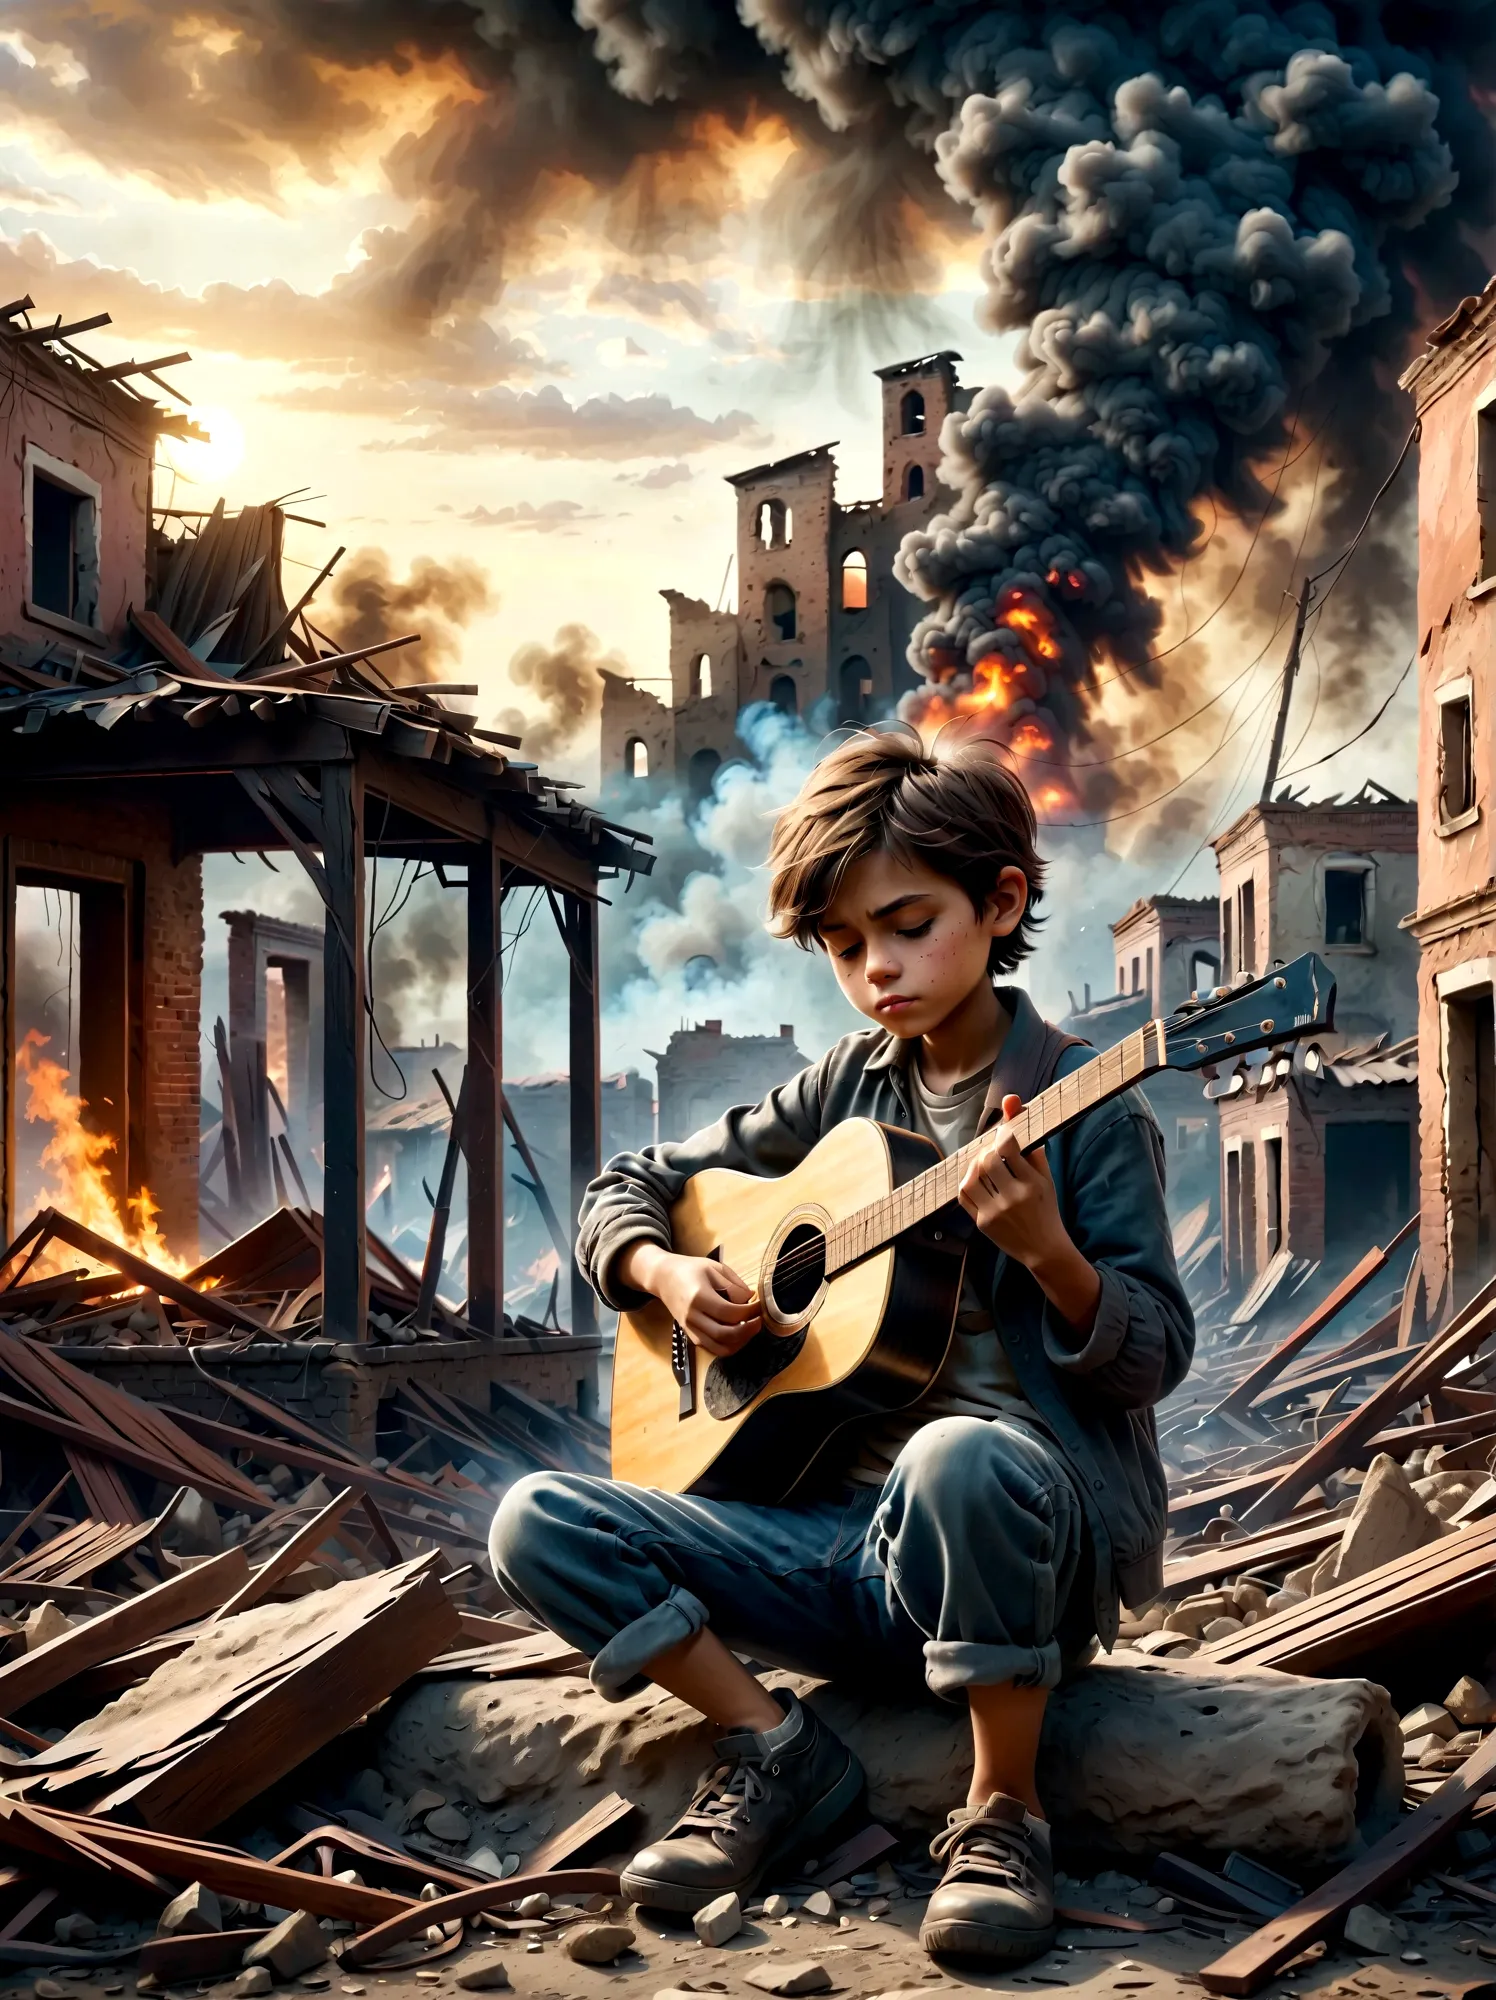 In the midst of a war-torn, smoky ruin, a  child is playing a guitar. The scene captures the stark contrast between the devastat...